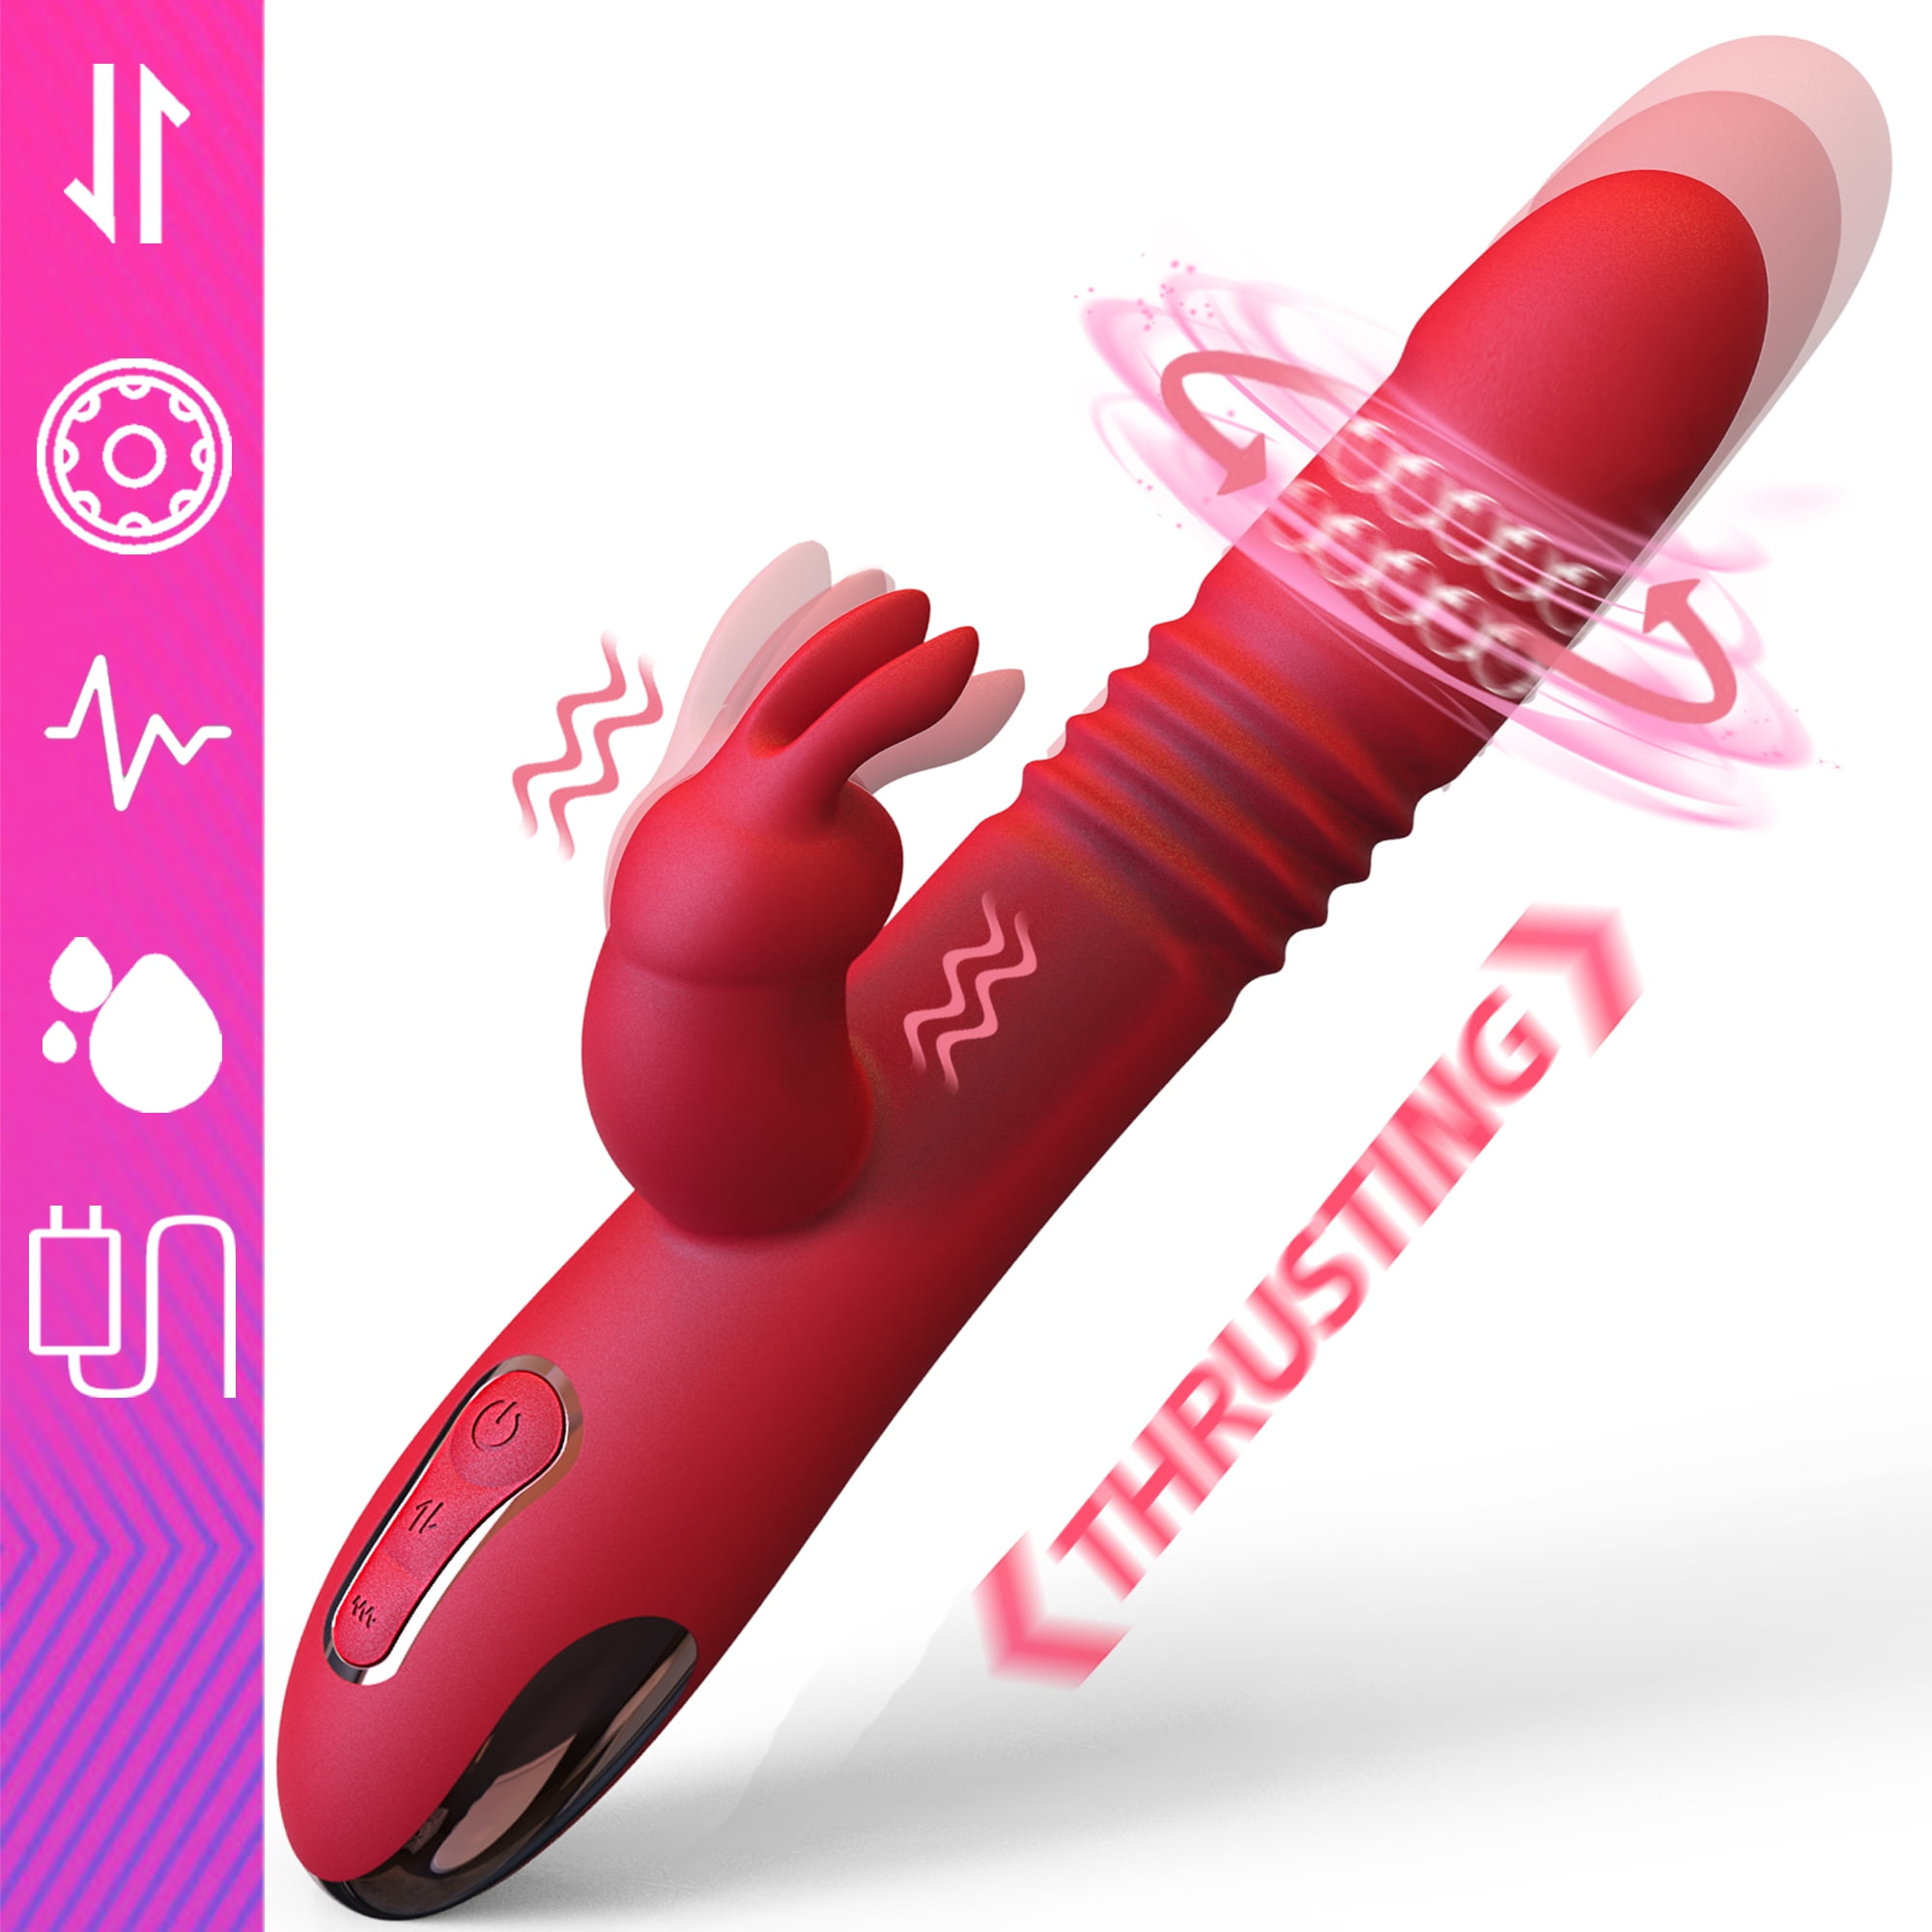 Erifxes Sex Toys Thrusting Rabbit Vibrator for Women, Rotating Sex Toy with Beads,Triple Stimulating Adult Toy, Clitoral G-spot Stimulator Massager for Women Pleasure Couples Sexual Games Porn Photo